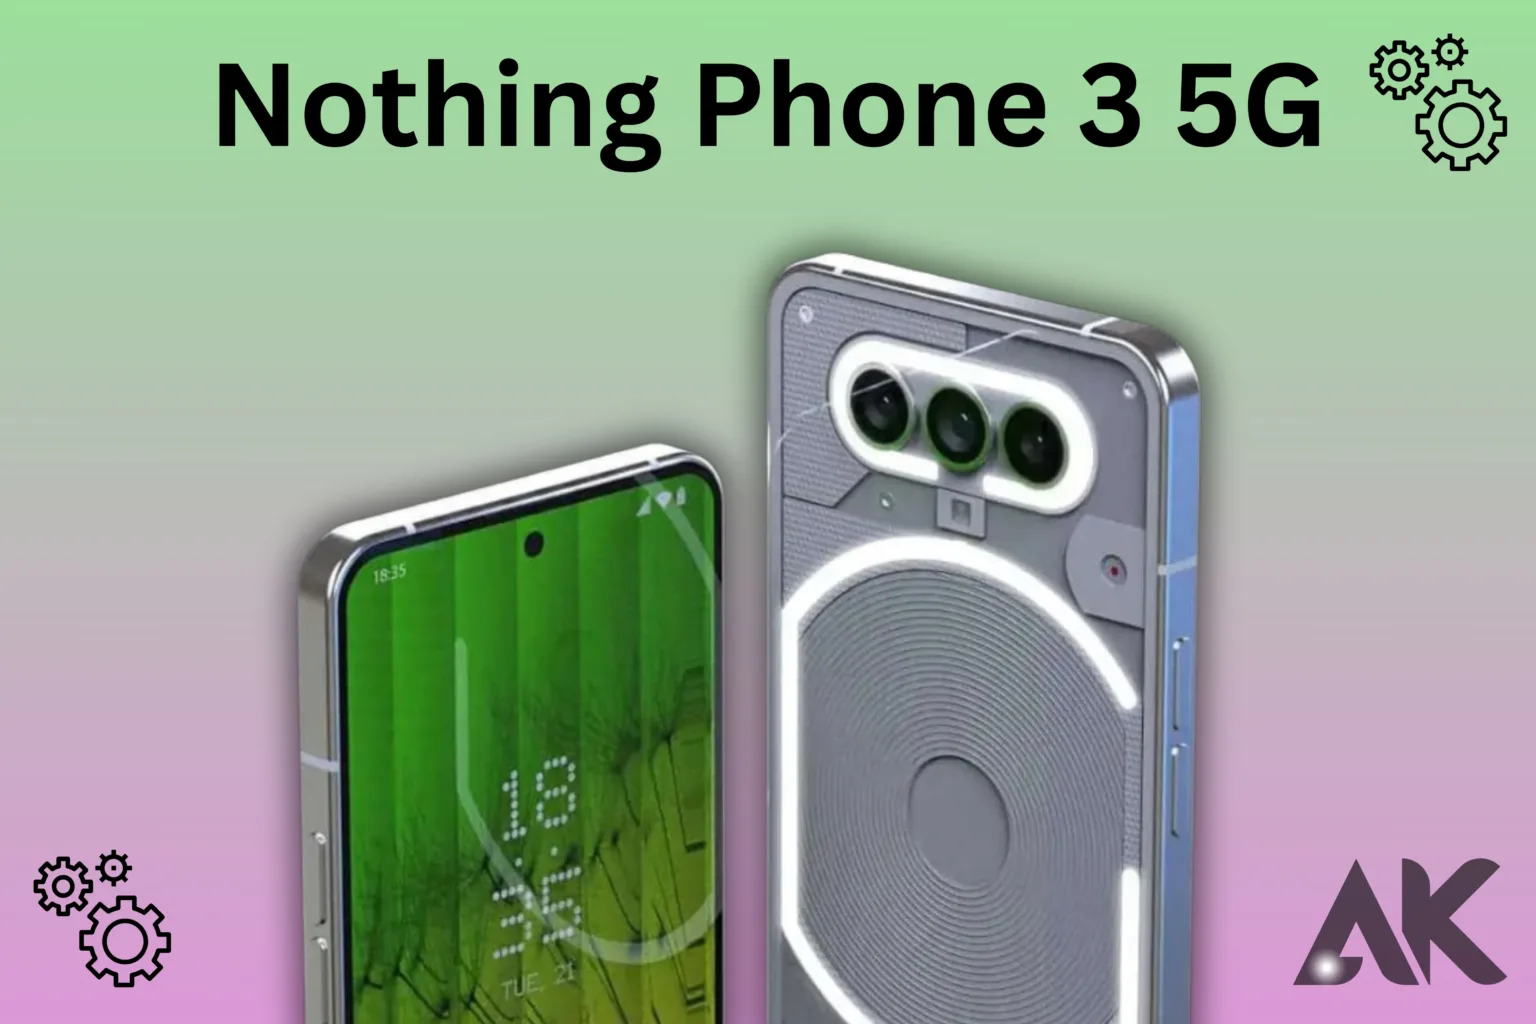 Nothing Phone 3 features